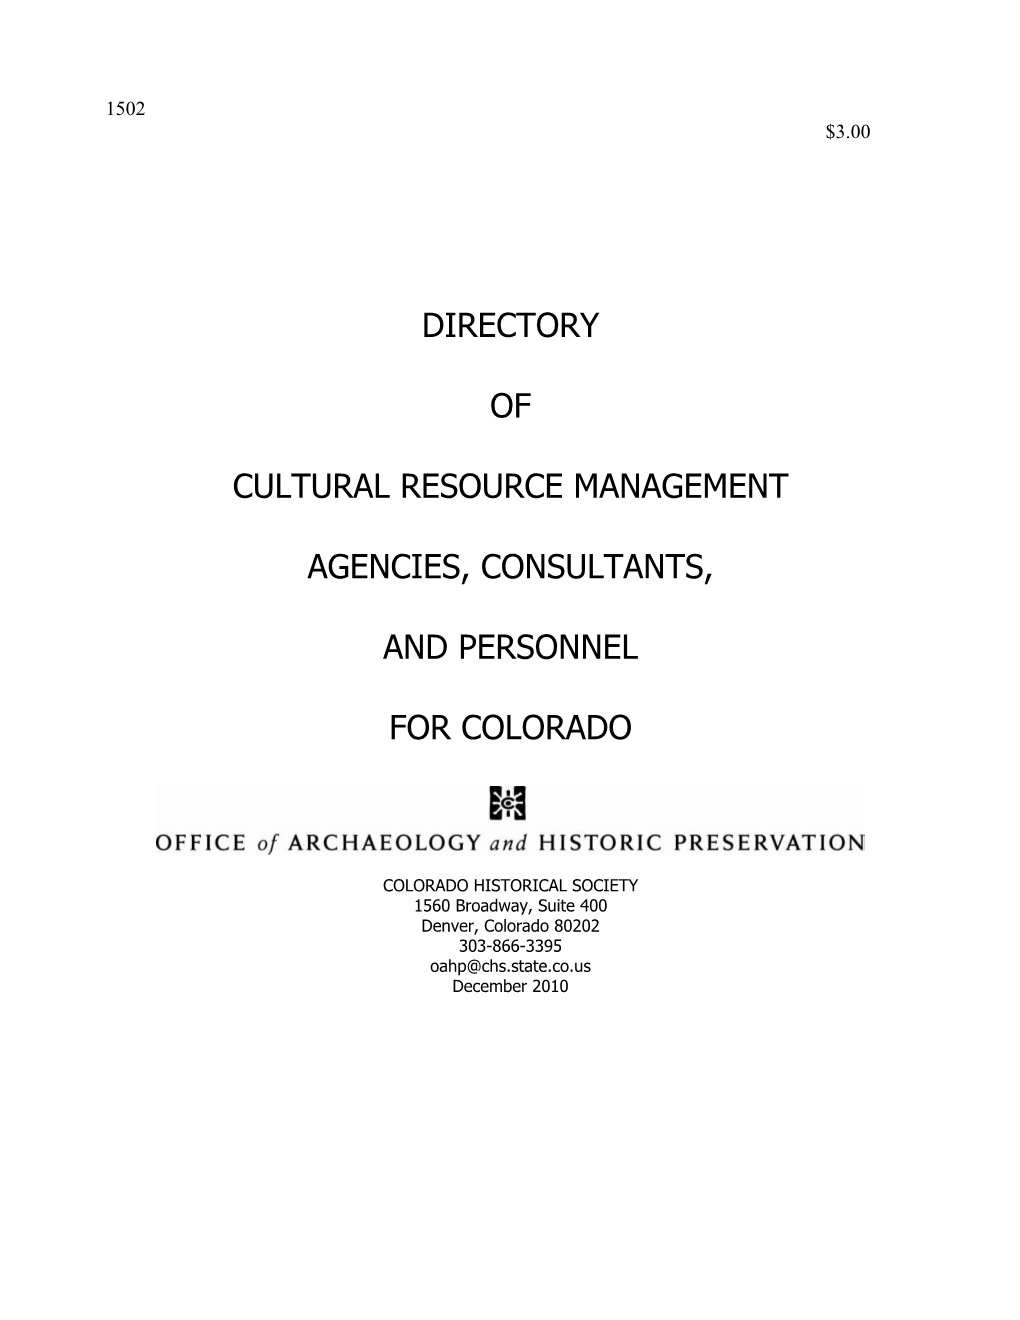 Directory of Cultural Resource Management Agencies, Consultants and Personnel for Colorado